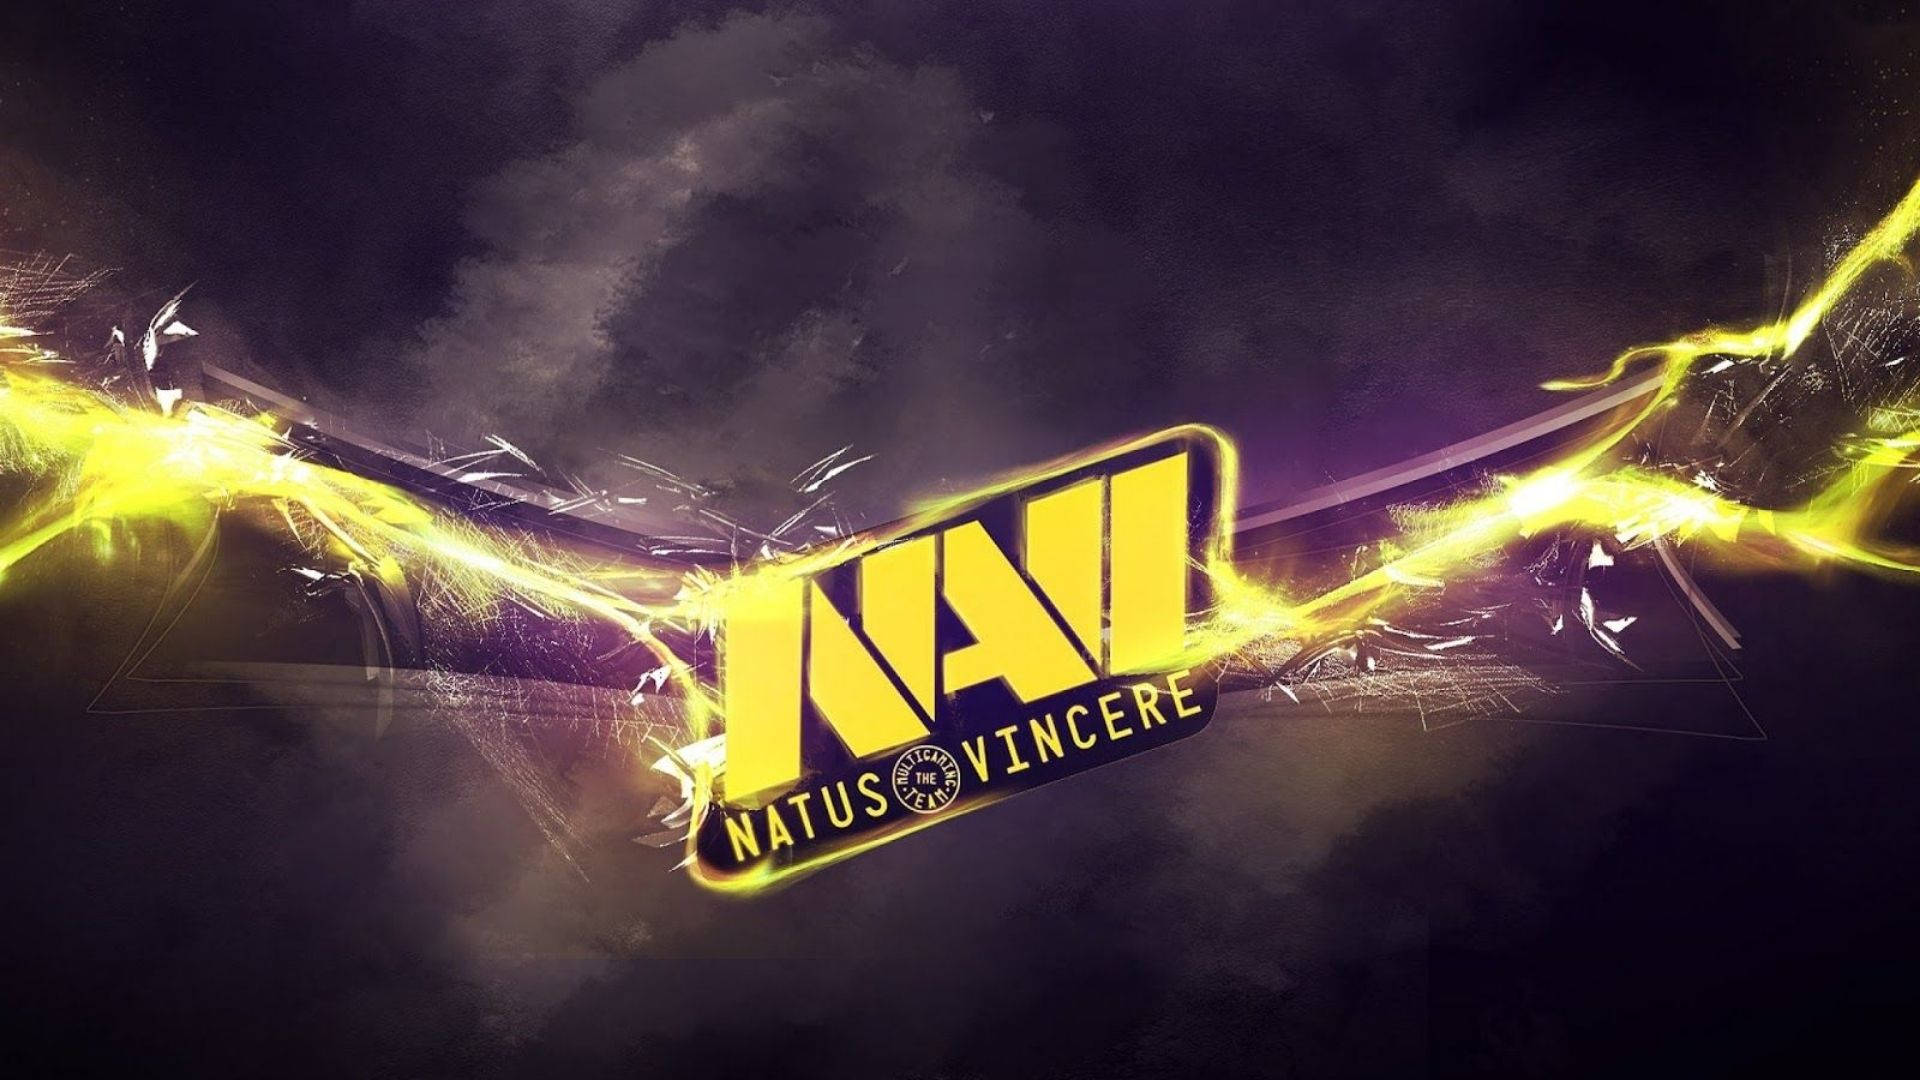 Bolted Logo Of Natus Vincere Background